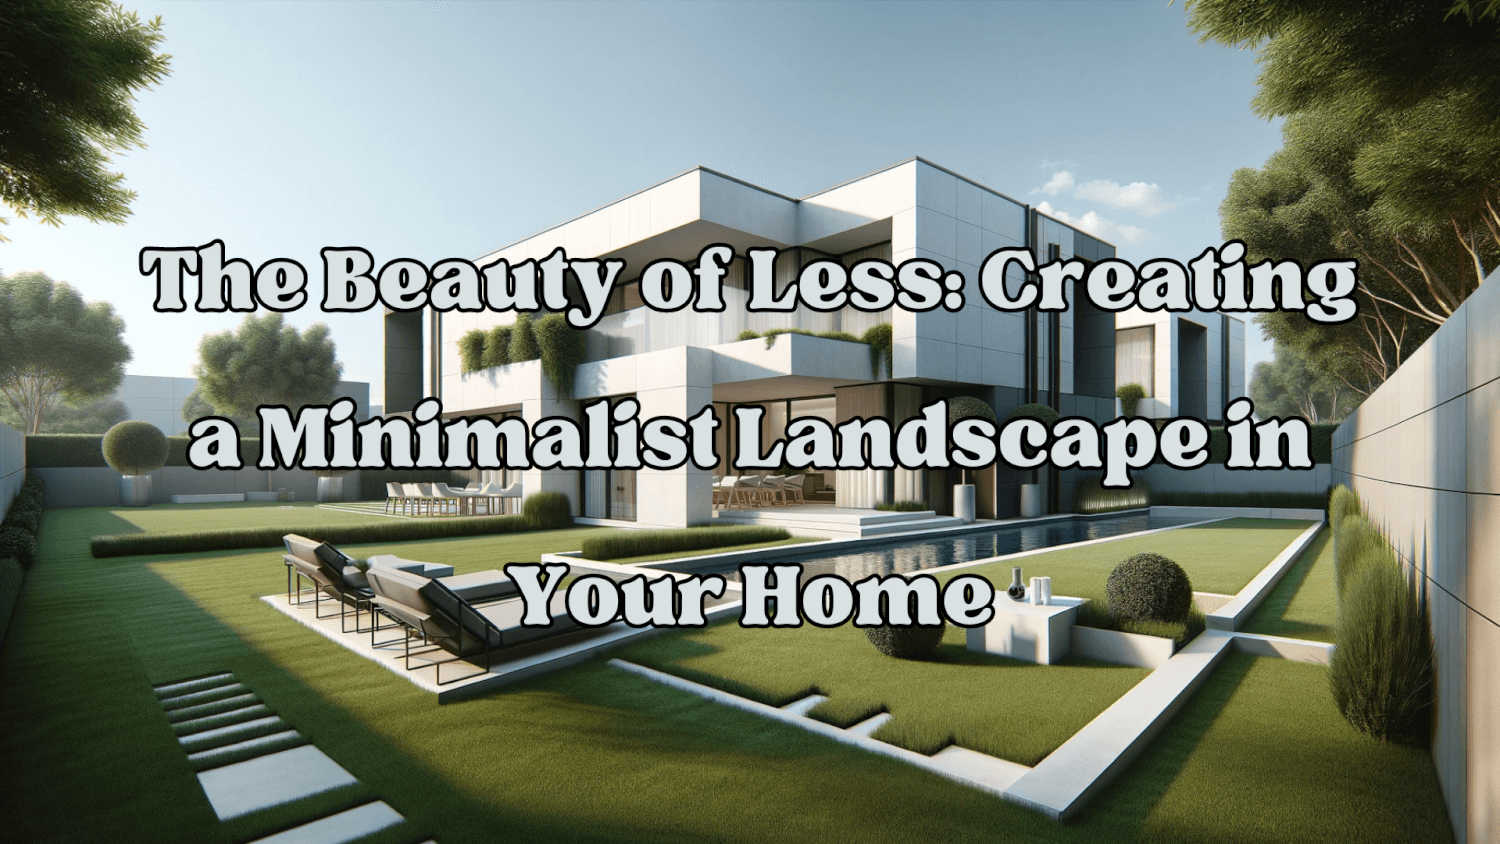 The Beauty of Less: Creating a Minimalist Landscape in Your Home